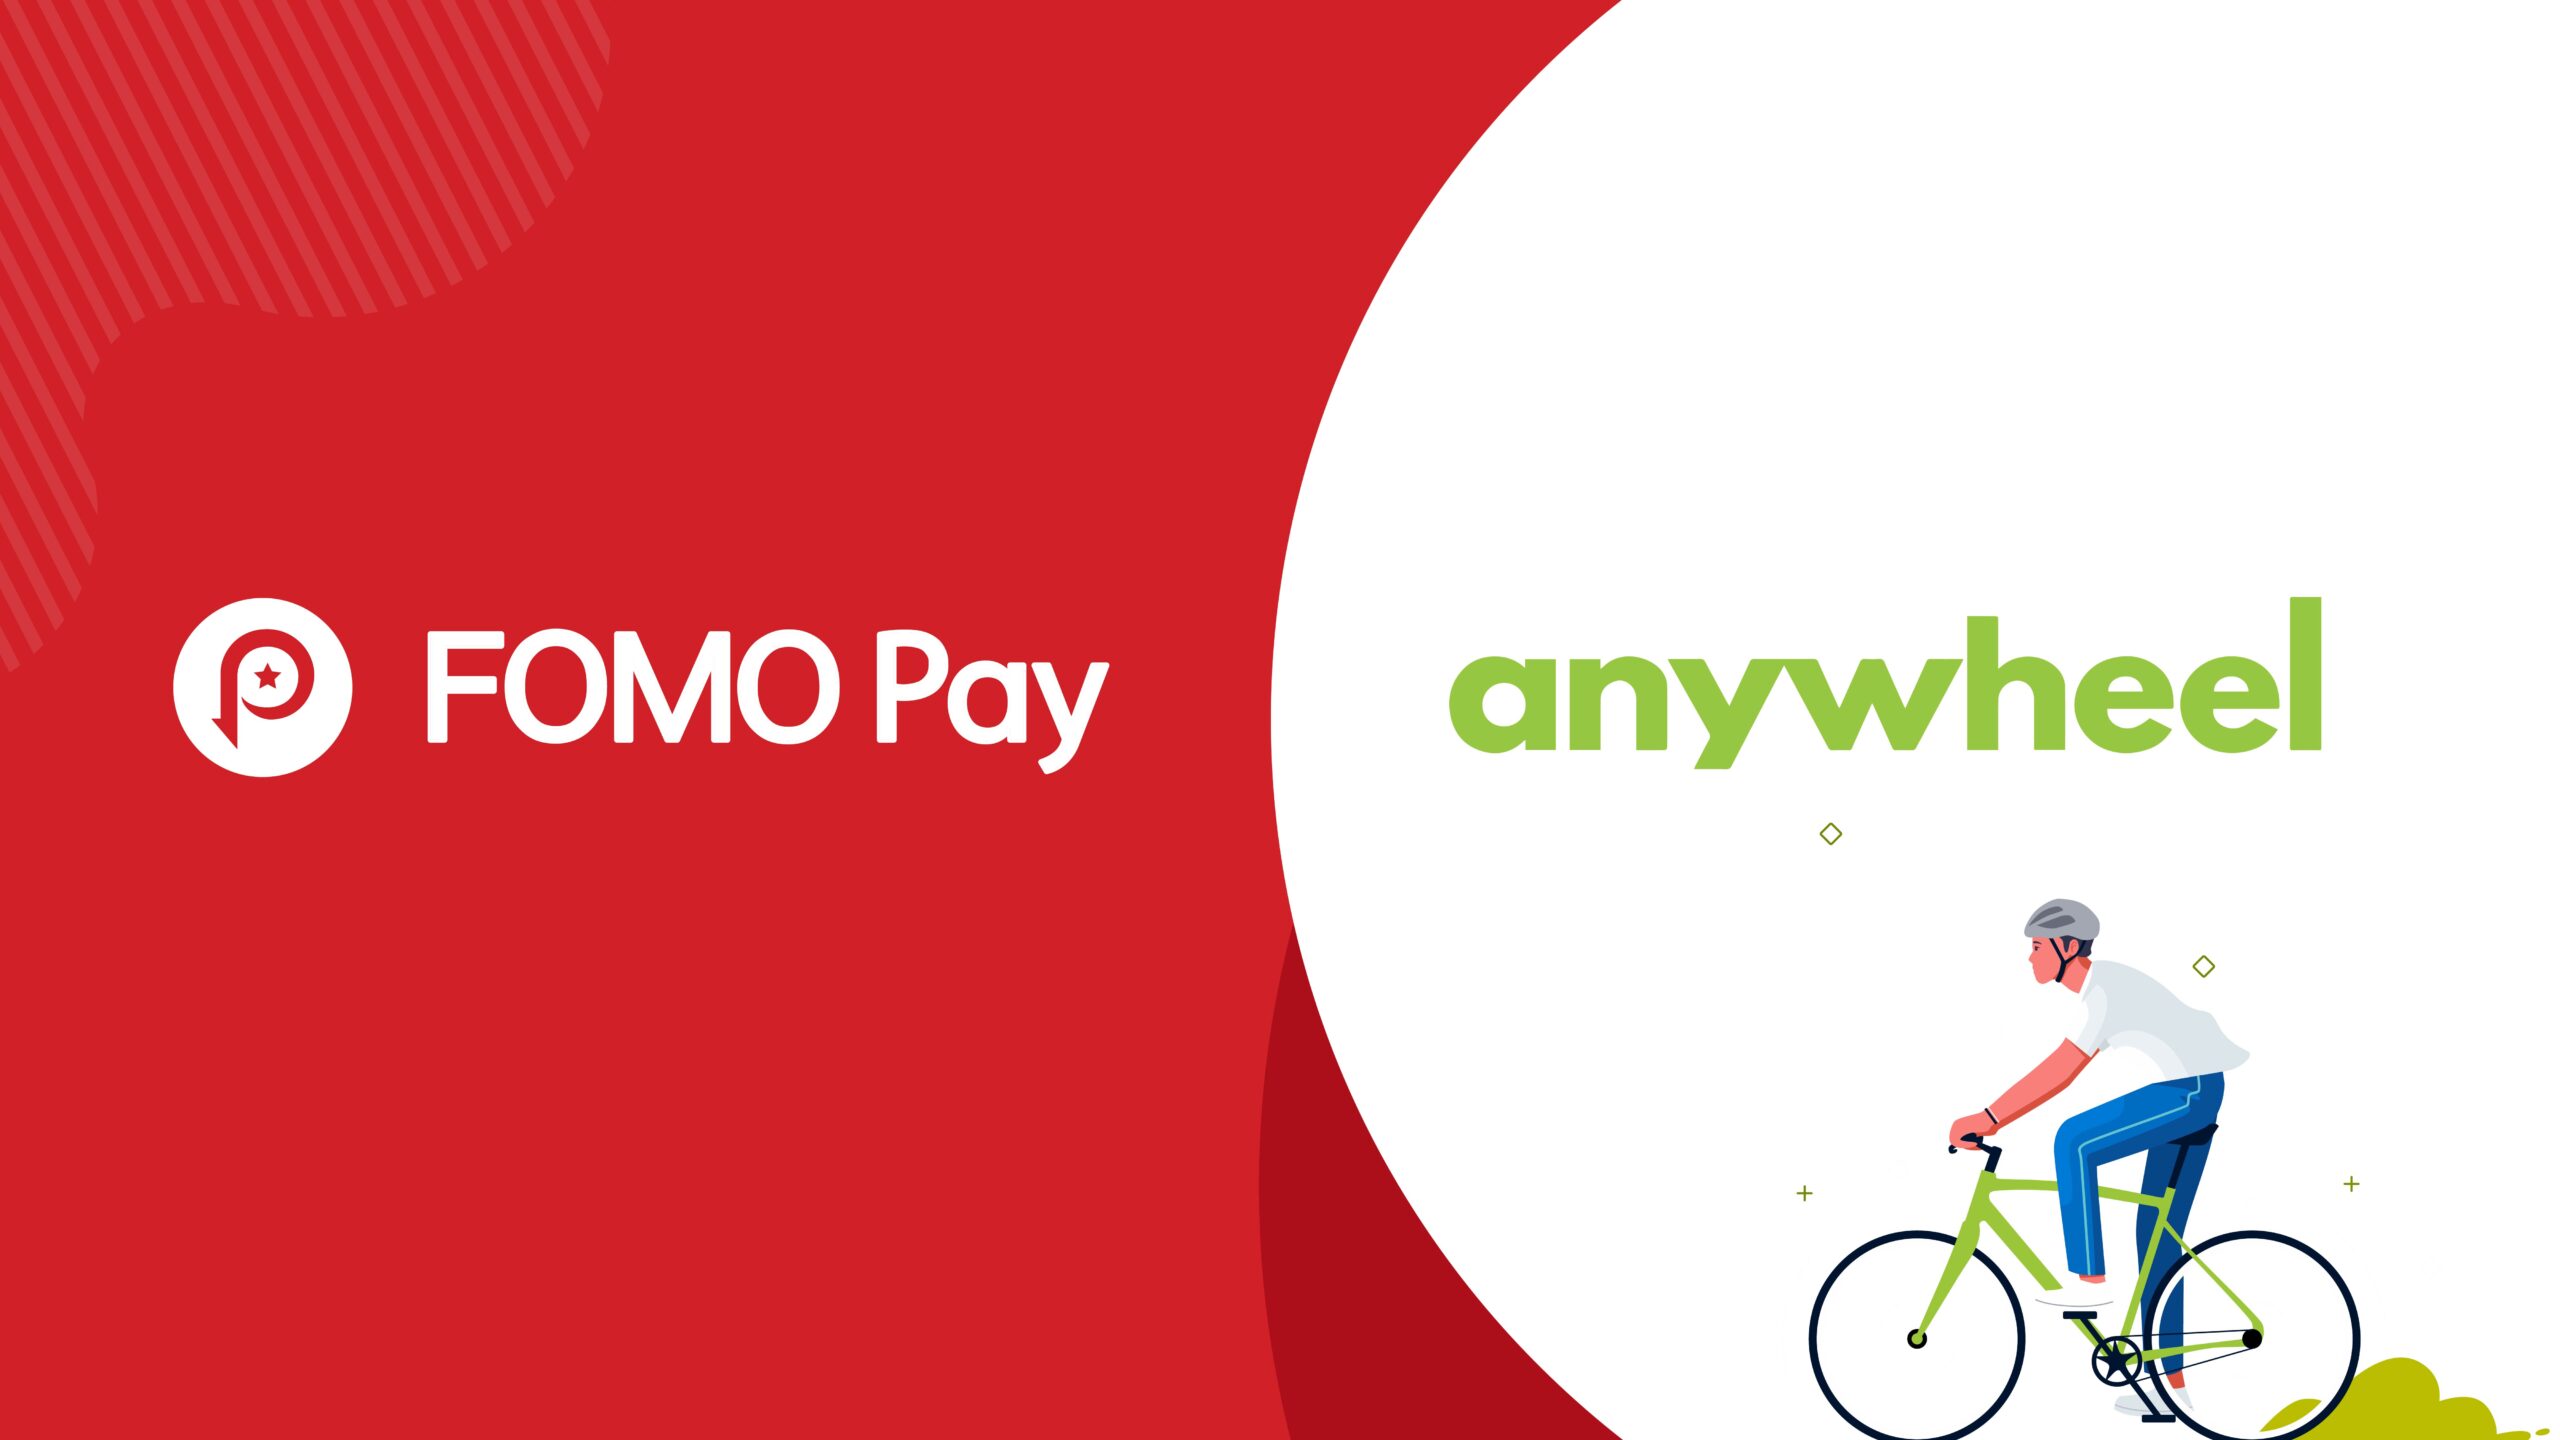 FOMO Pay Partners with Anywheel to Empower Eco-friendly Bike-sharing Services in Singapore